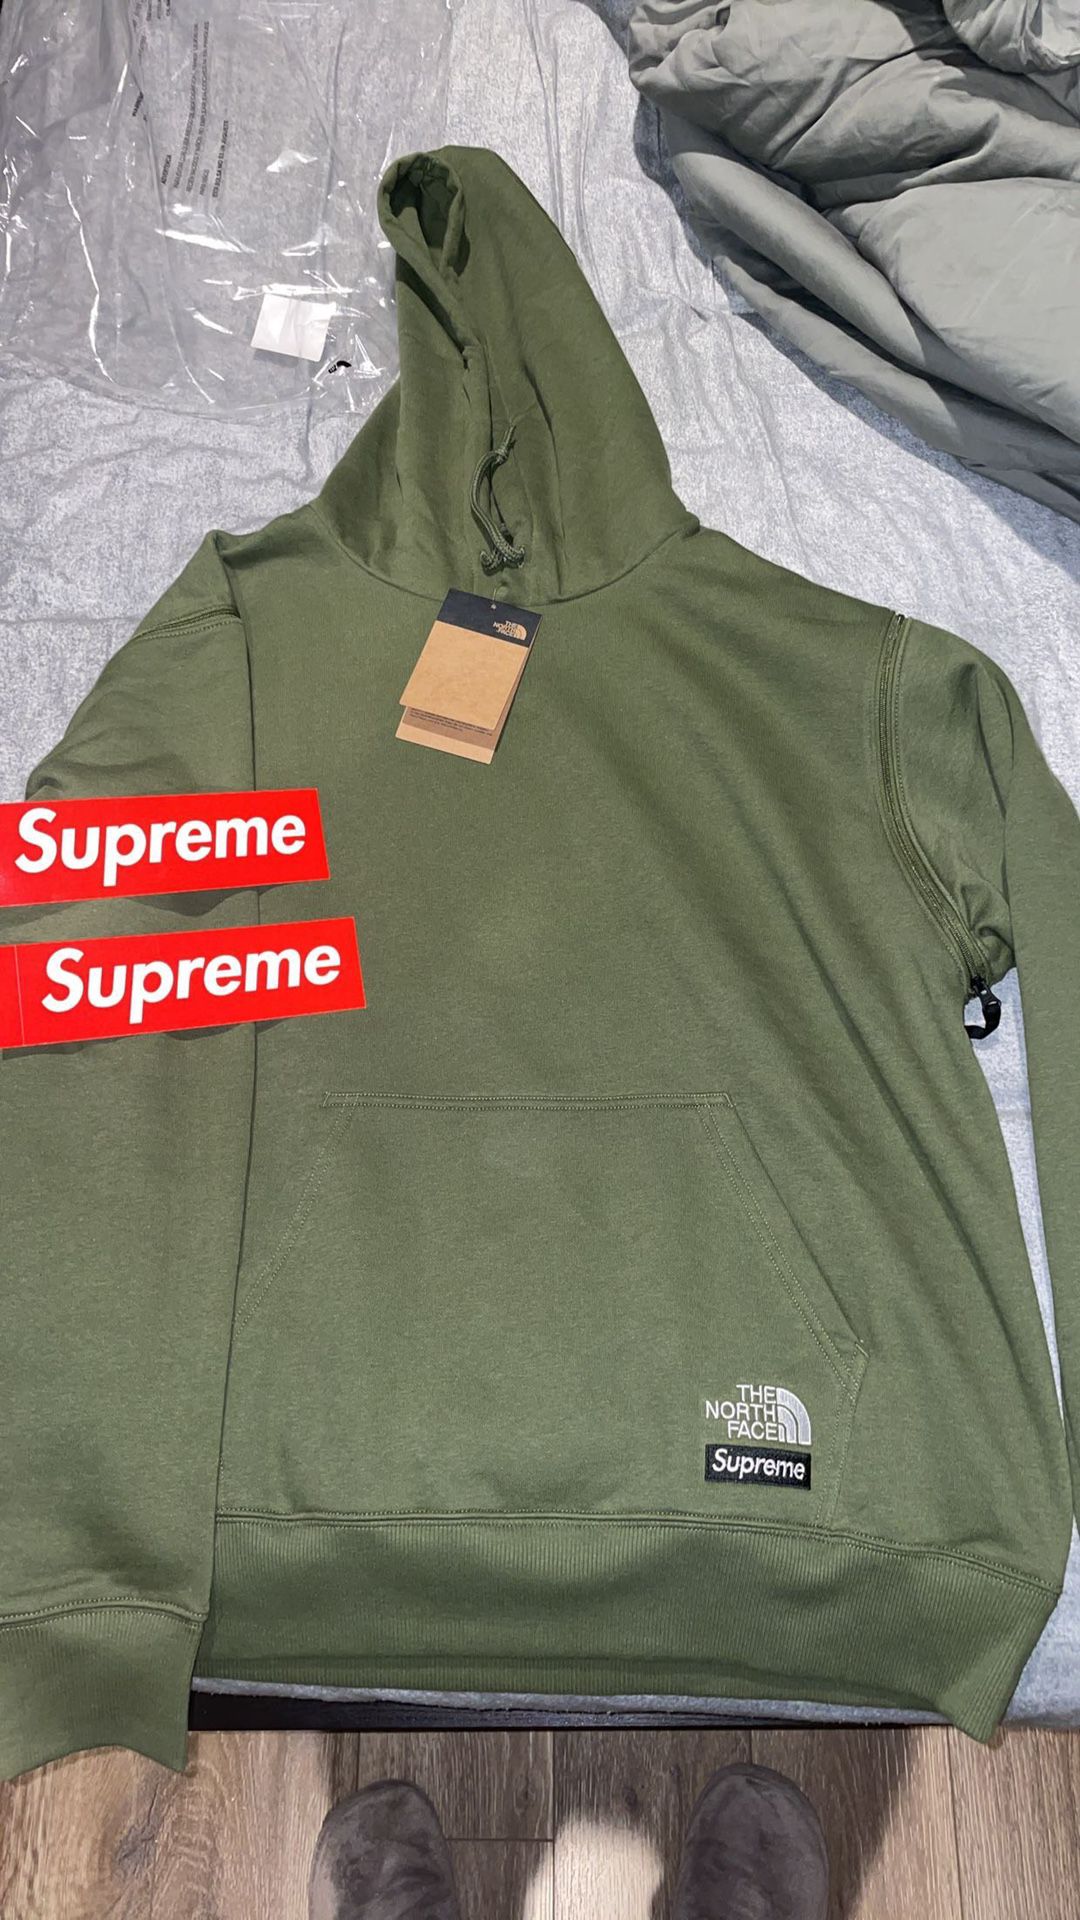 Supreme X The North Face Hoodie